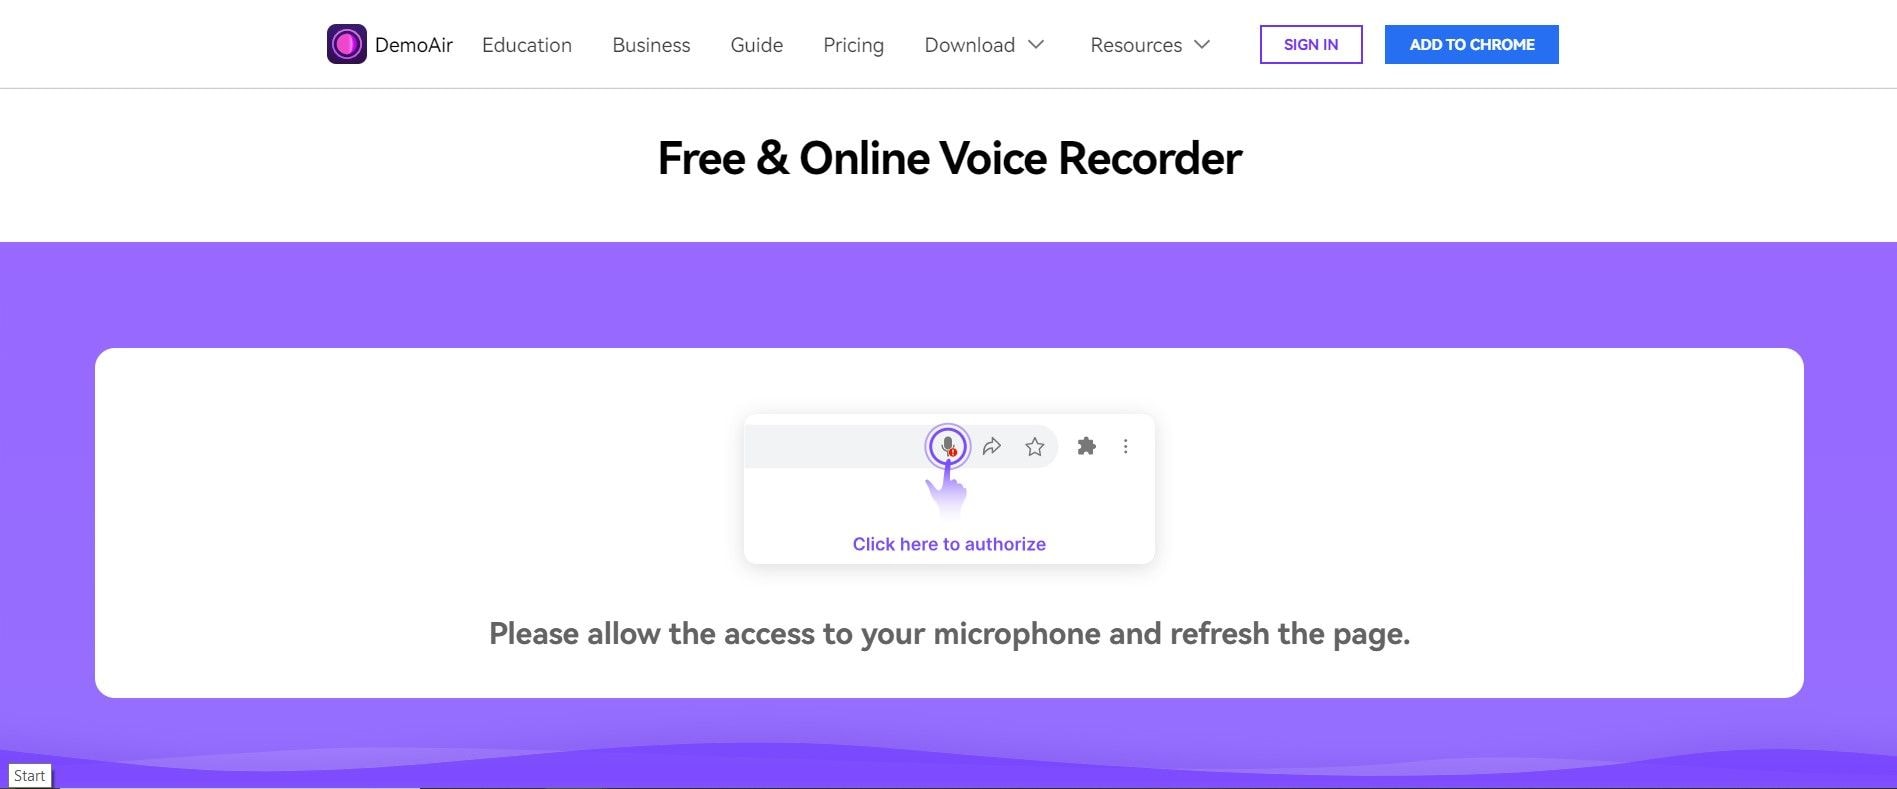 give demoair permission to use the microphone